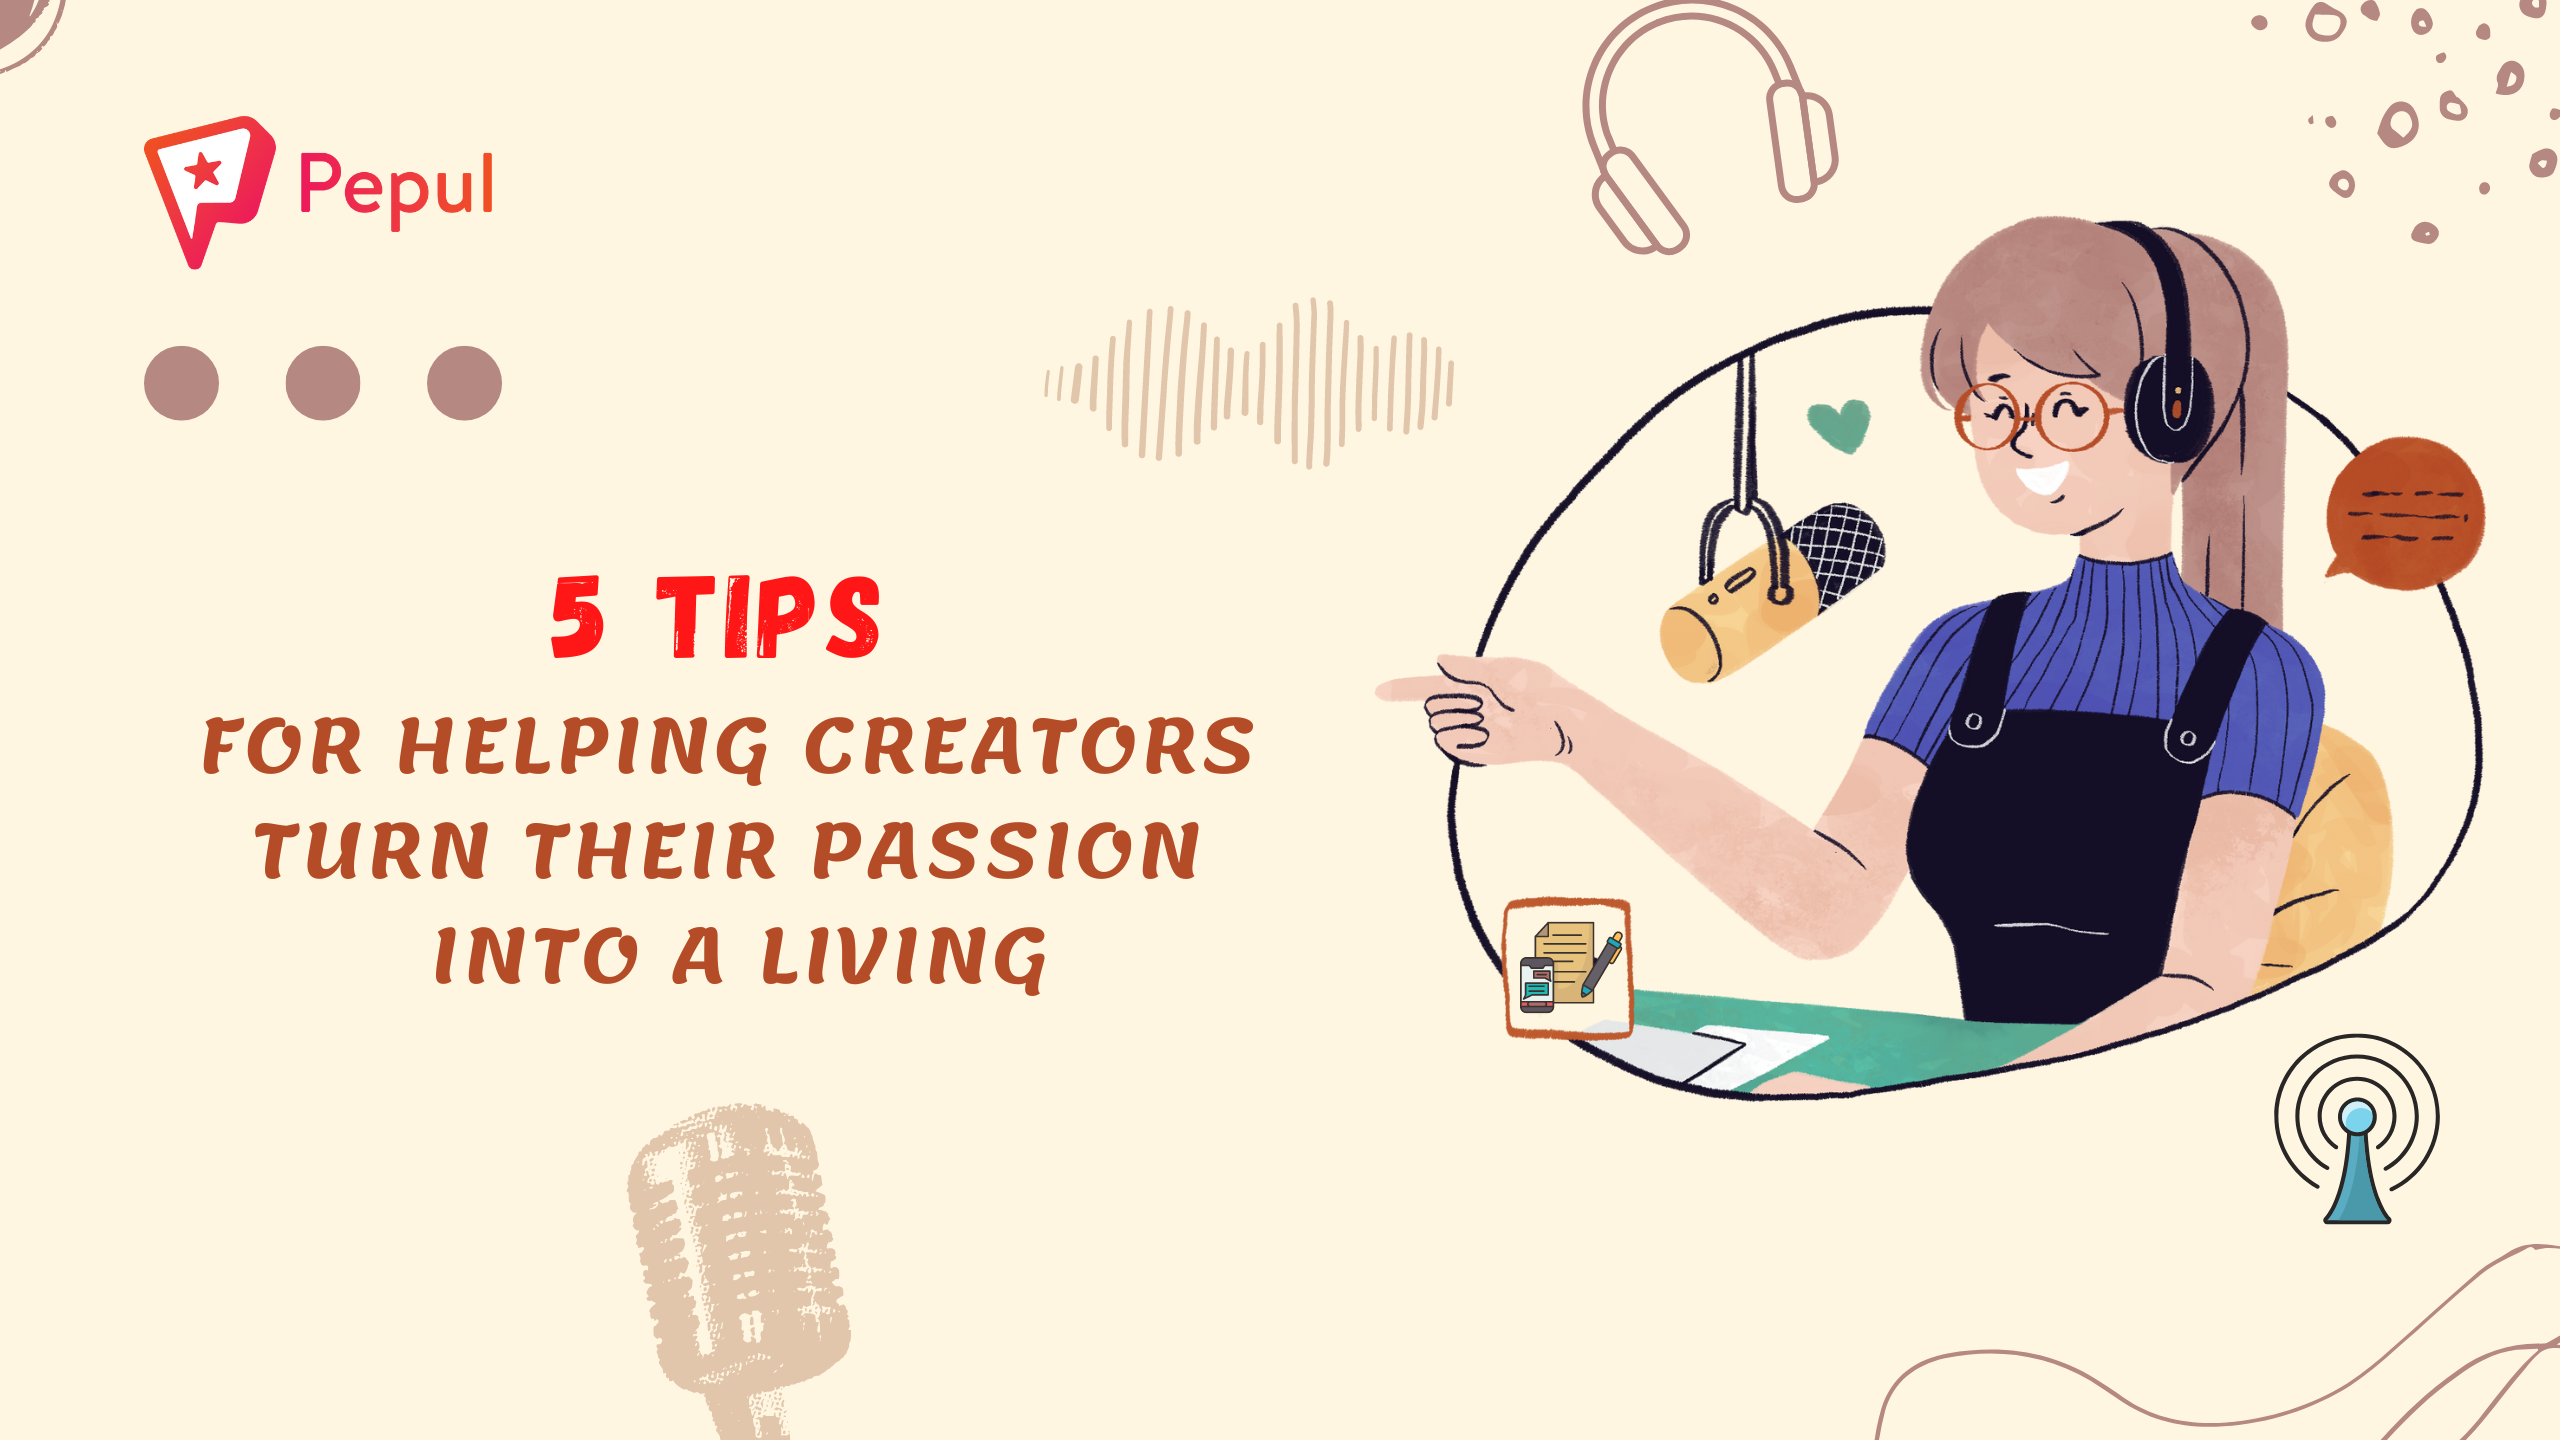 5 Tips for Helping Creators Turn Their Passion Into a Living